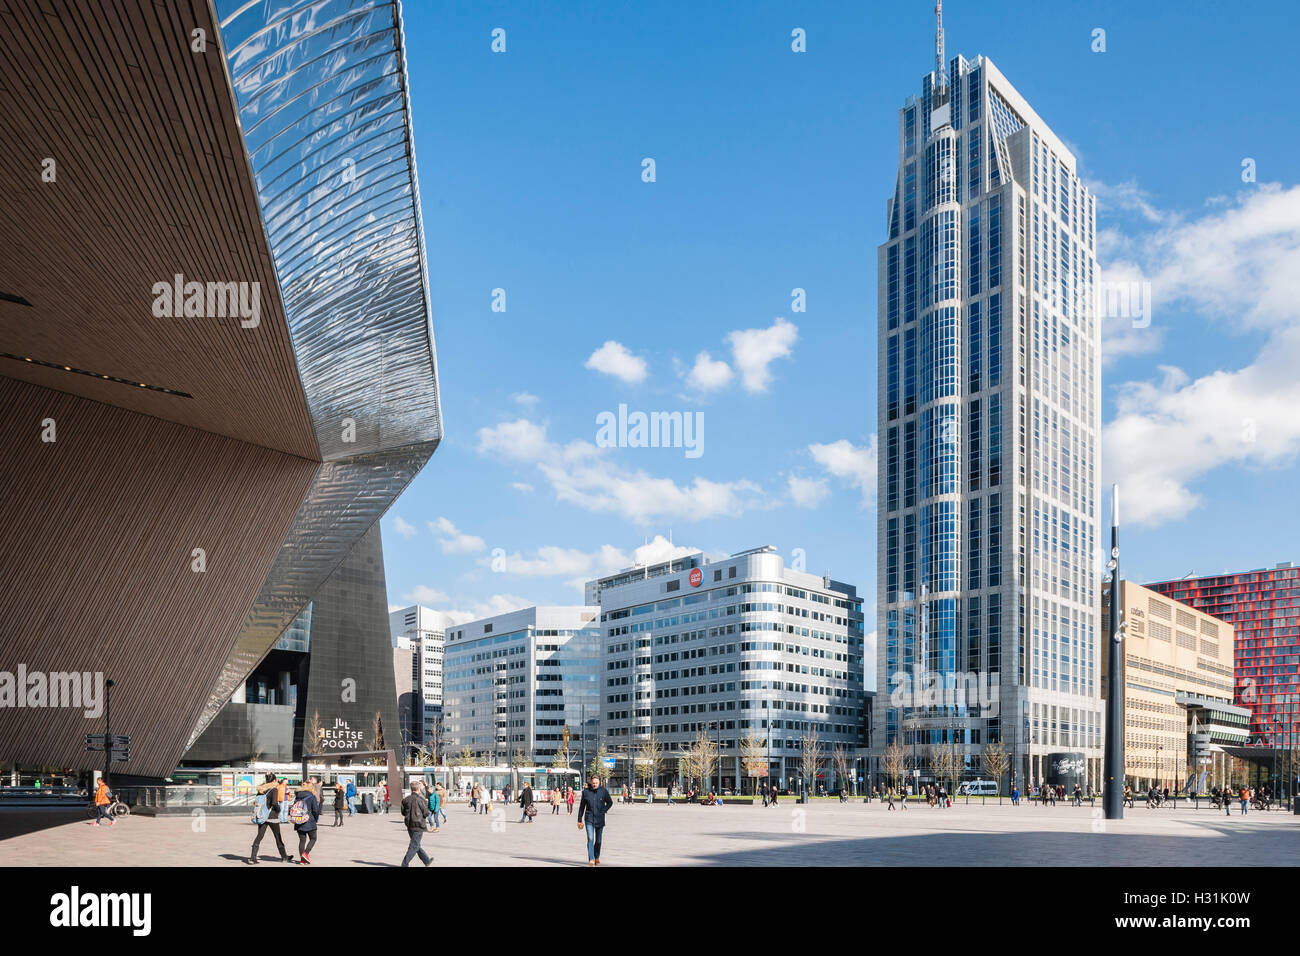 Main entrance angular view of metal clad canopy, high-rise buildings and public plaza. Centraal Station, Rotterdam, Netherlands. Architect: Benthem Crouwel Architects + MVSA Architects + Wes, 2014. Stock Photo